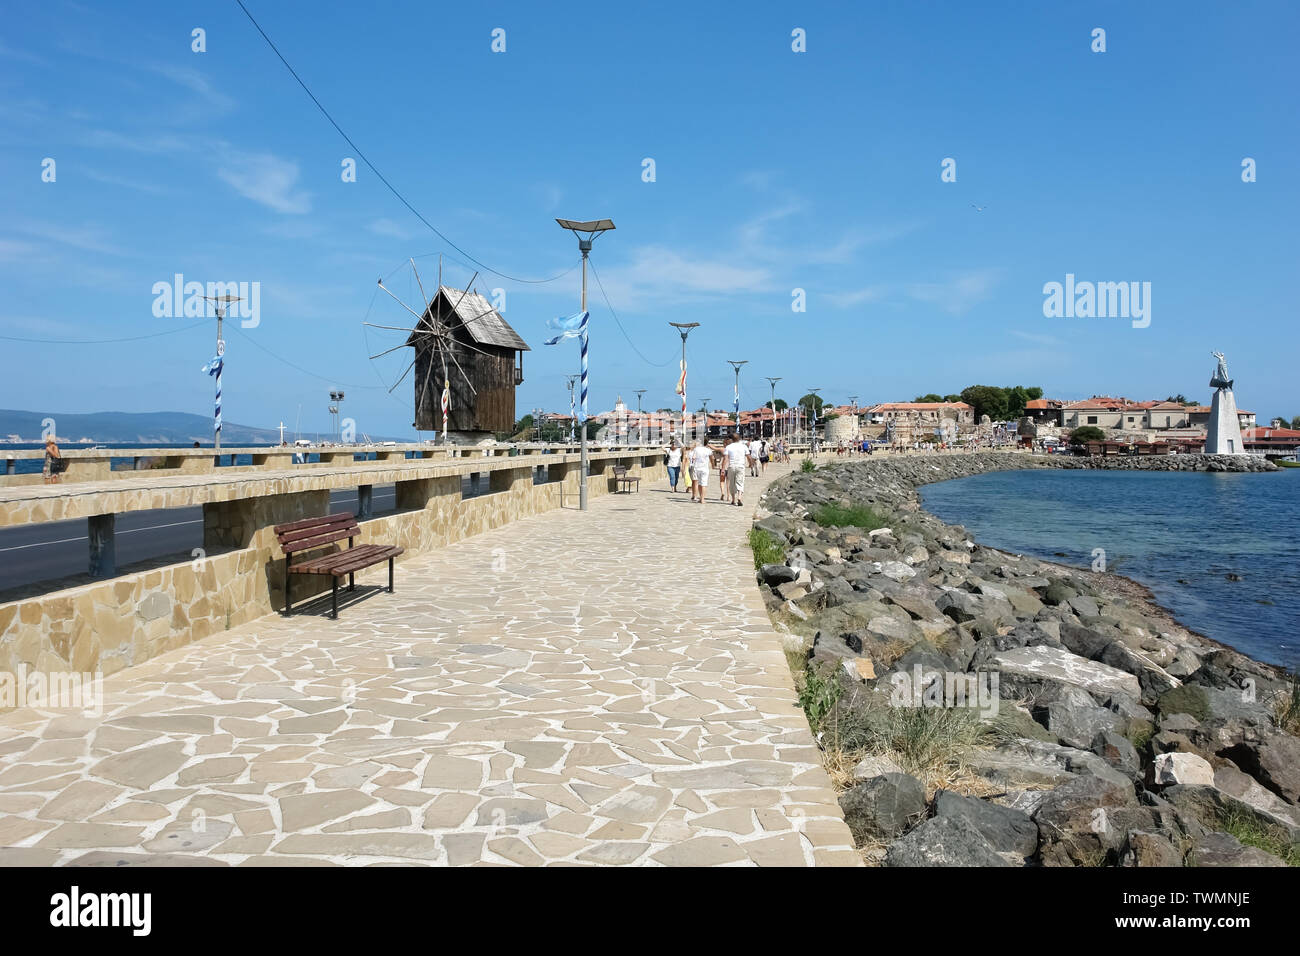 Nessebar, Bulgaria - August 17, 2012: View of the embankment with wooden windmill and harbor of the old town of Nessebar, Black Sea coast of Bulgaria. Stock Photo